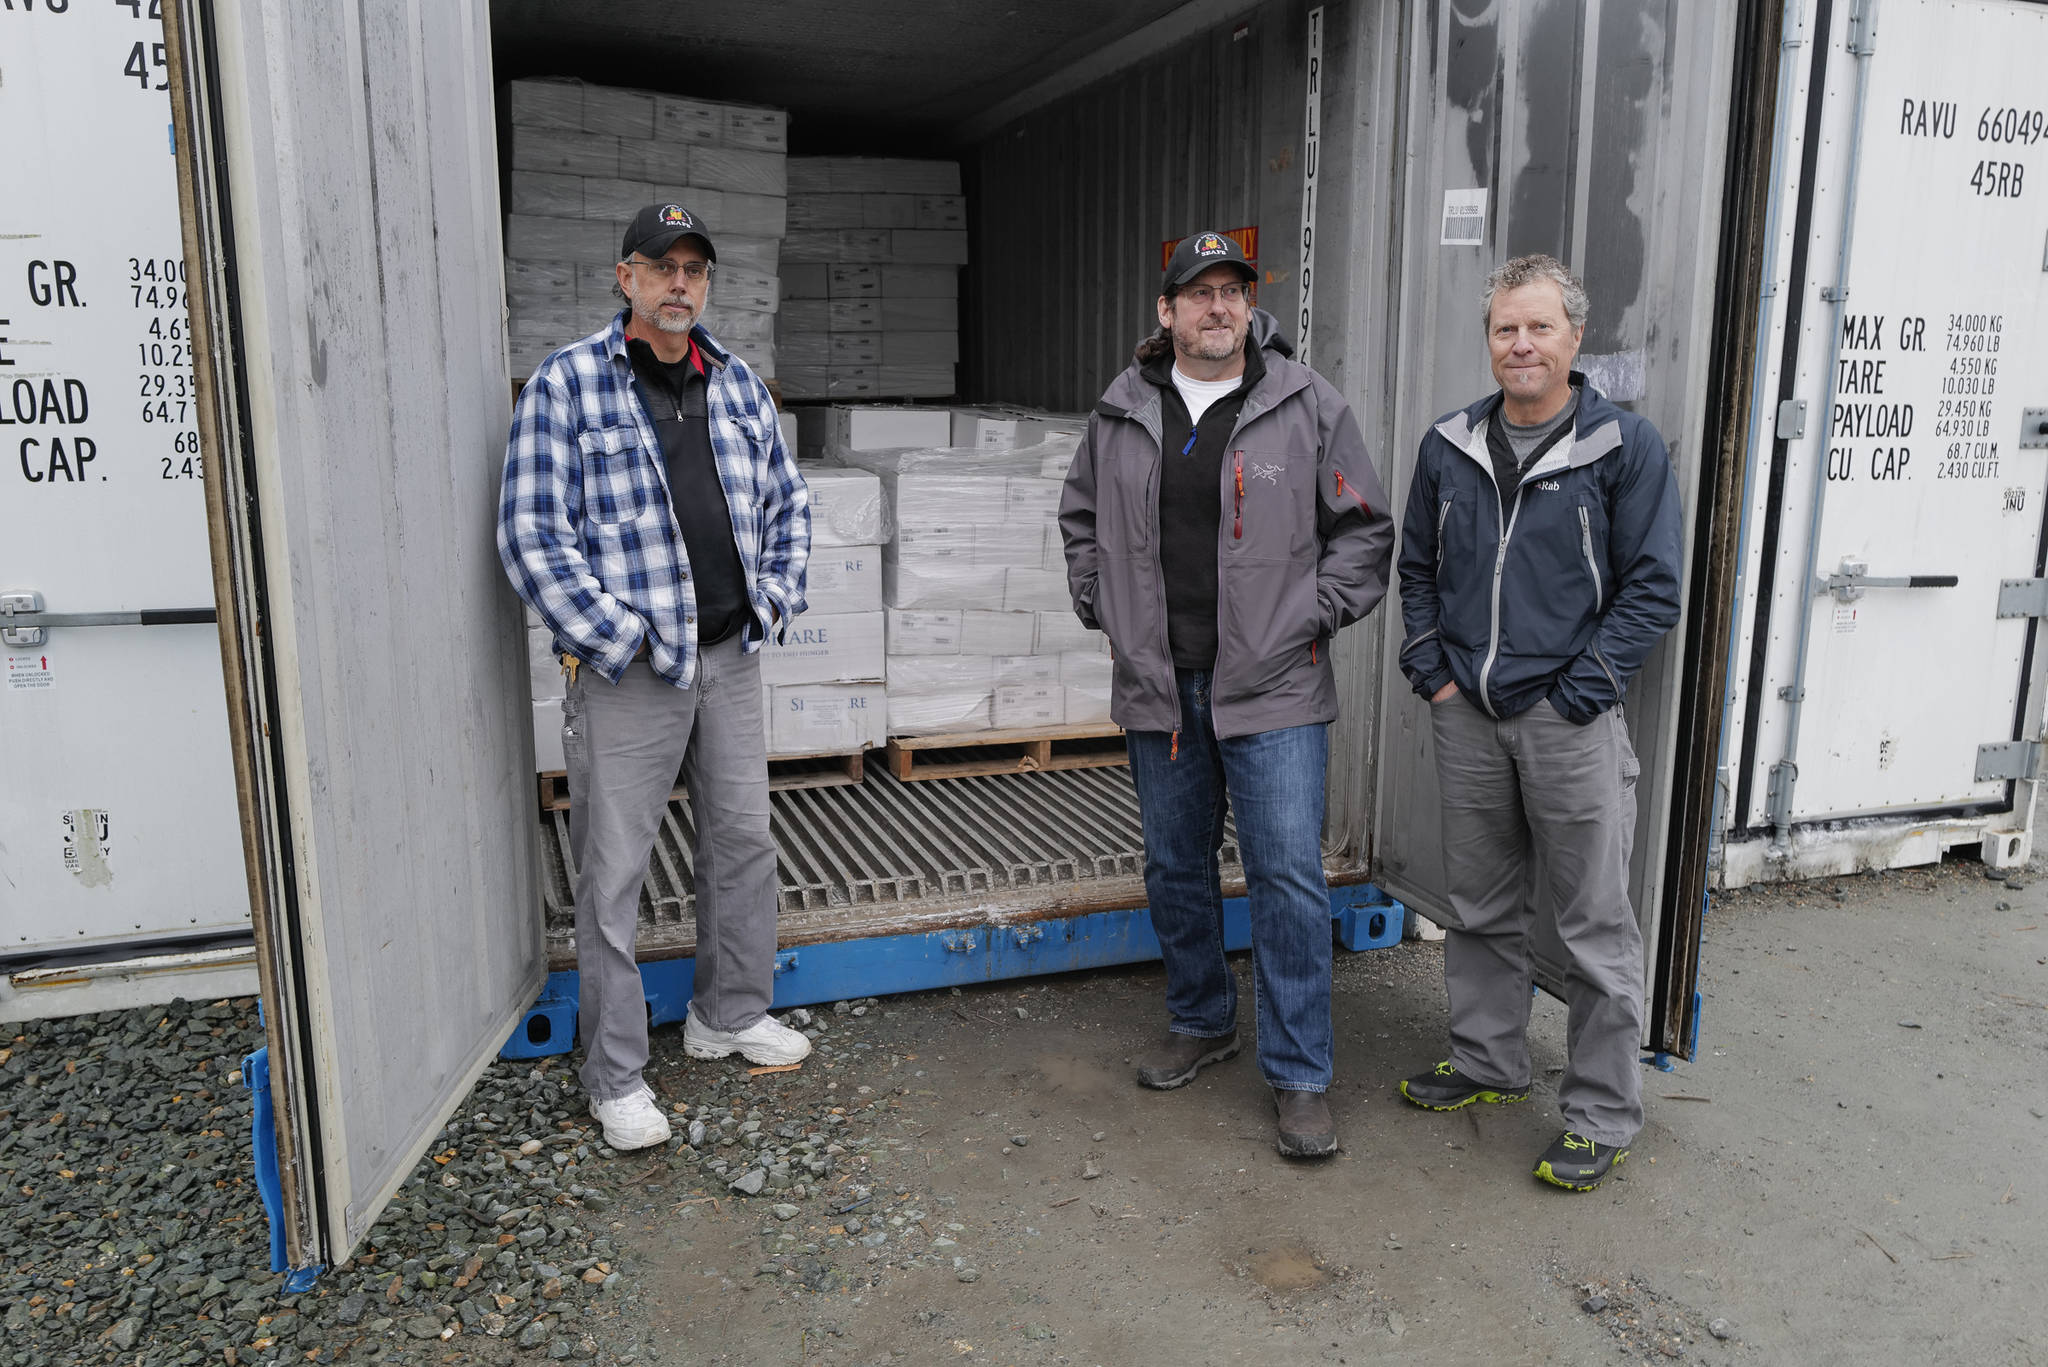 Chris Shapp, left, and Dave Lefebvre, center, of the Southeast Alaska Food Bank, stand with Jim Harmon, executive director of SeaShare, on Thursday, Nov. 7, 2019. Seashare donated a 40-foot freezer van and 20,000 pounds of seafood to the foodbank. SeaShare is a nonprofit founded in 1994 to help the seafood industry donate to hunger-relief efforts. The effort has prevented 5 million pounds of bycatch over 25 years from being dumped back into the ocean. (Michael Penn | Juneau Empire)